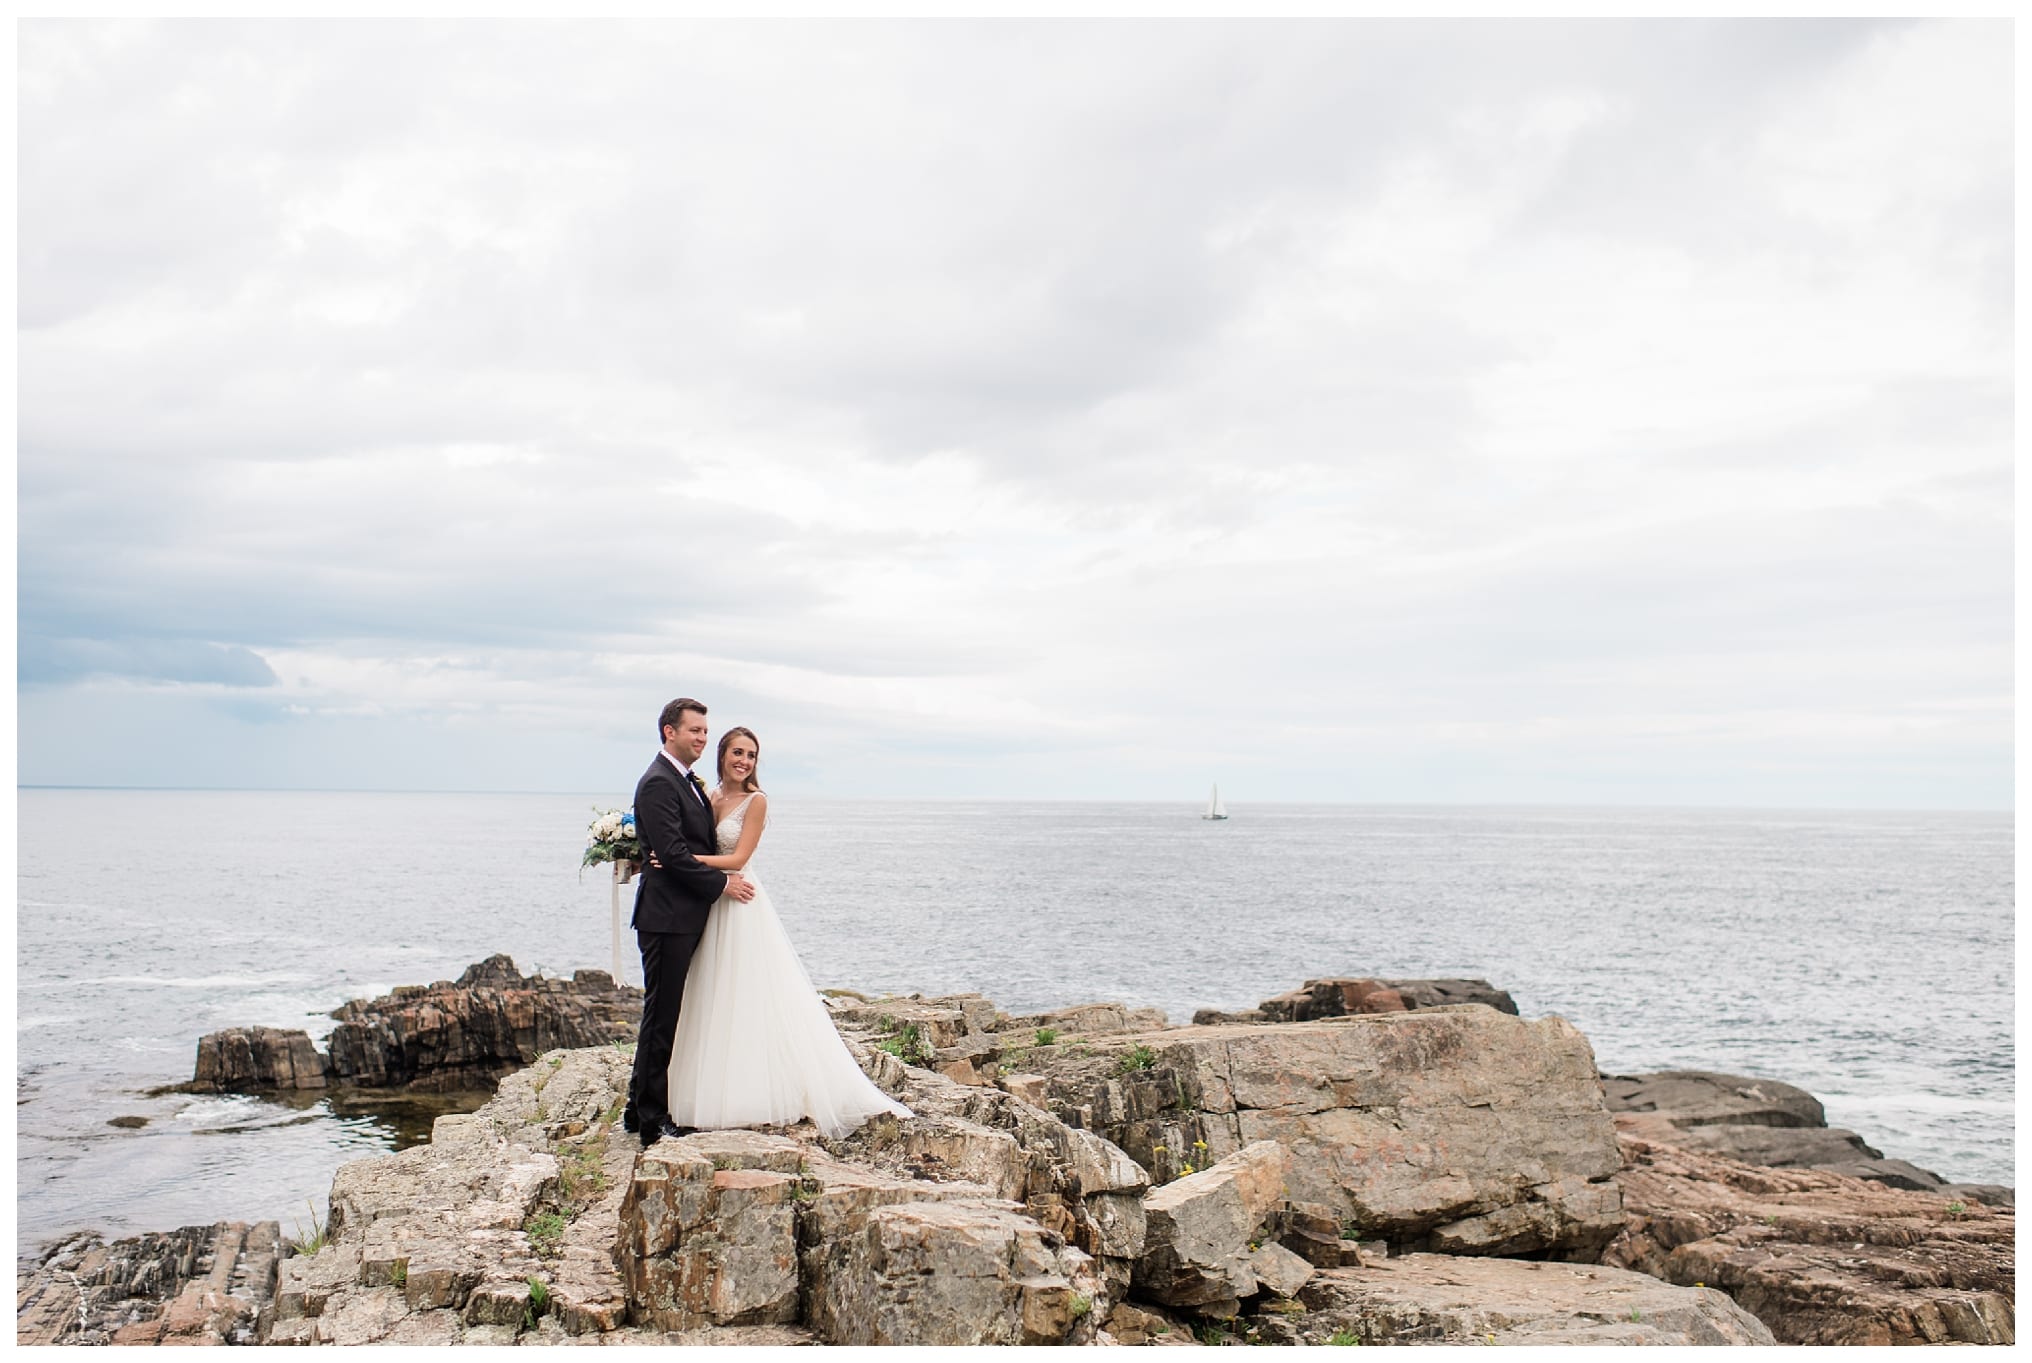 Cliff House Wedding Photography.